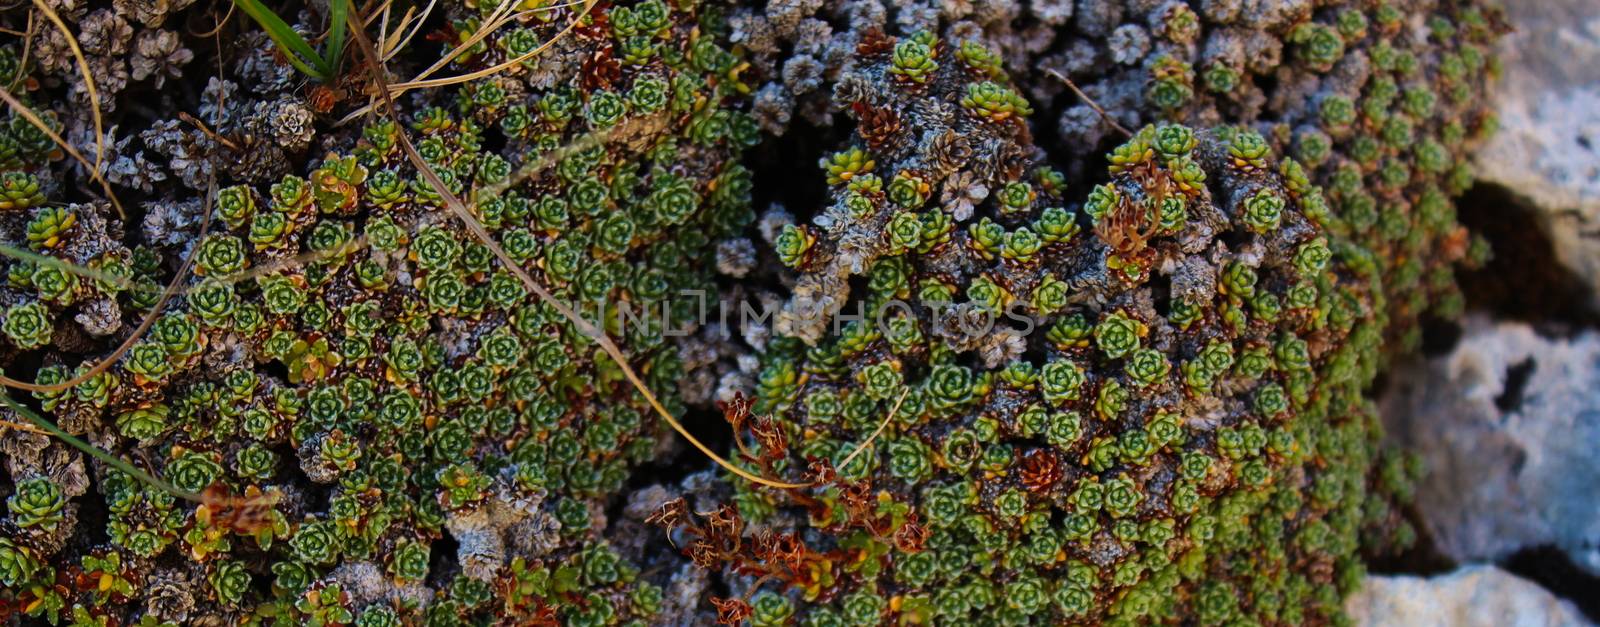 Small wild Sempervivum growing on stone in large numbers. Bjelasnica Mountain, Bosnia and Herzegovina.